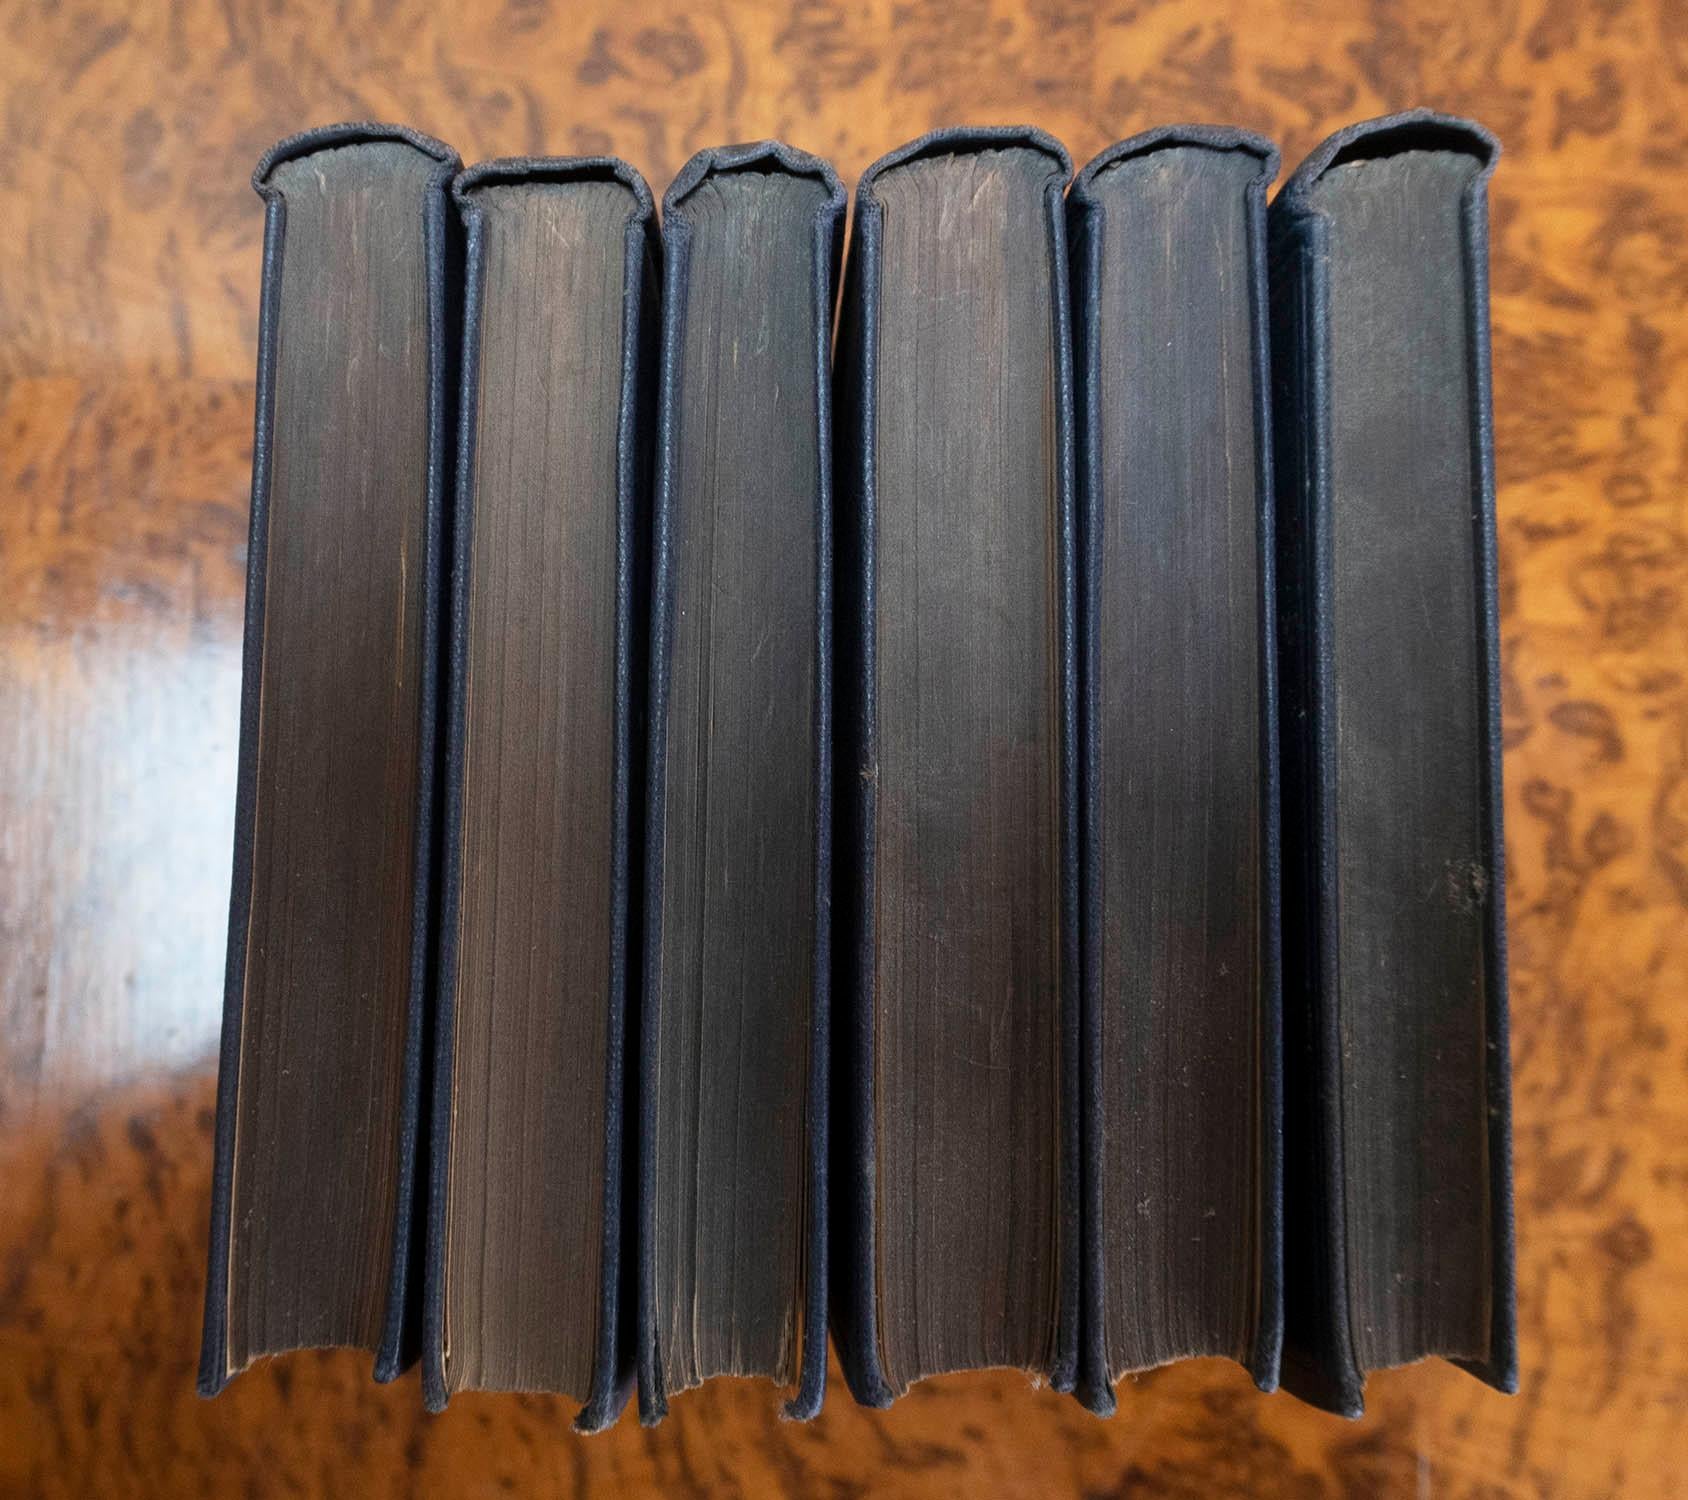 Set of 6 Blue Cloth Bound Books. The Works of H.H Munro.